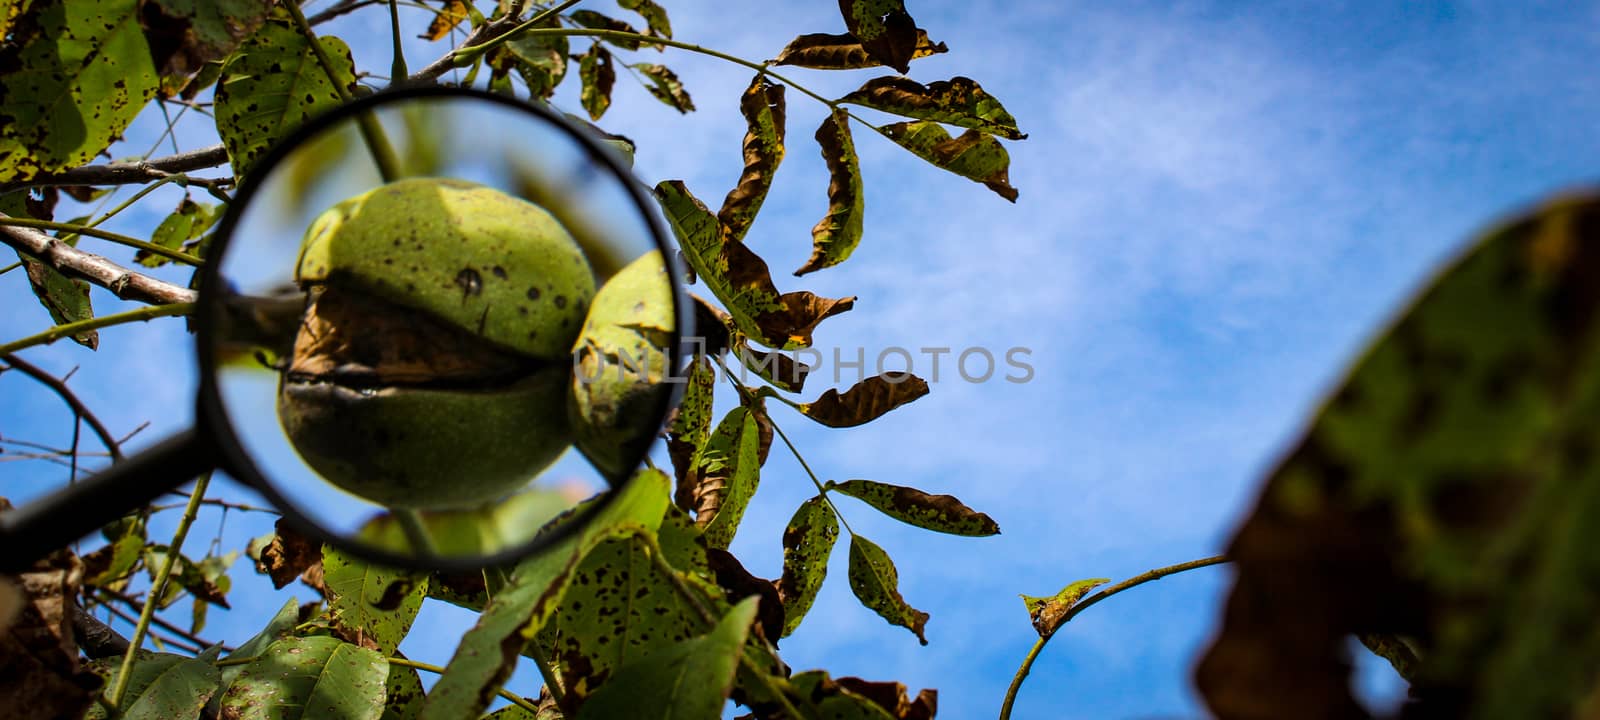 Walnut fruit banner magnified with a magnifying glass. Ripe walnut inside a cracked green shell on a branch with the sky in the background. Banner. by mahirrov